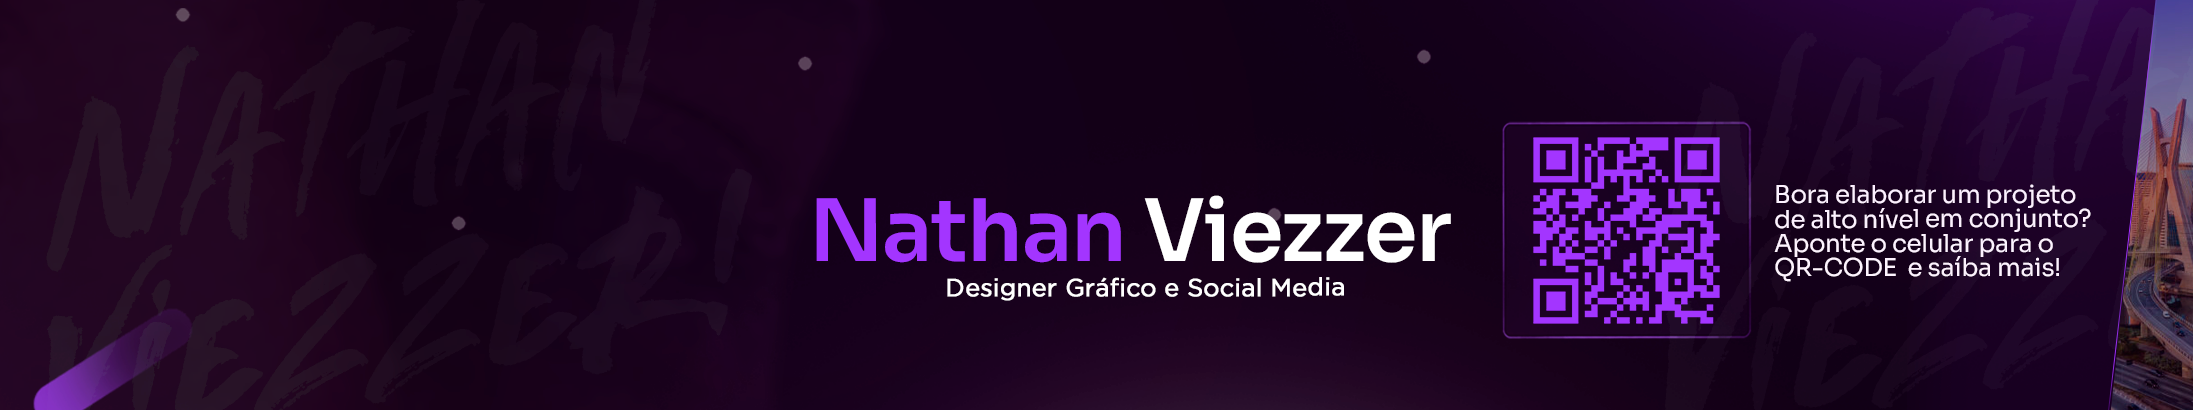 Nathan Viezzer's profile banner